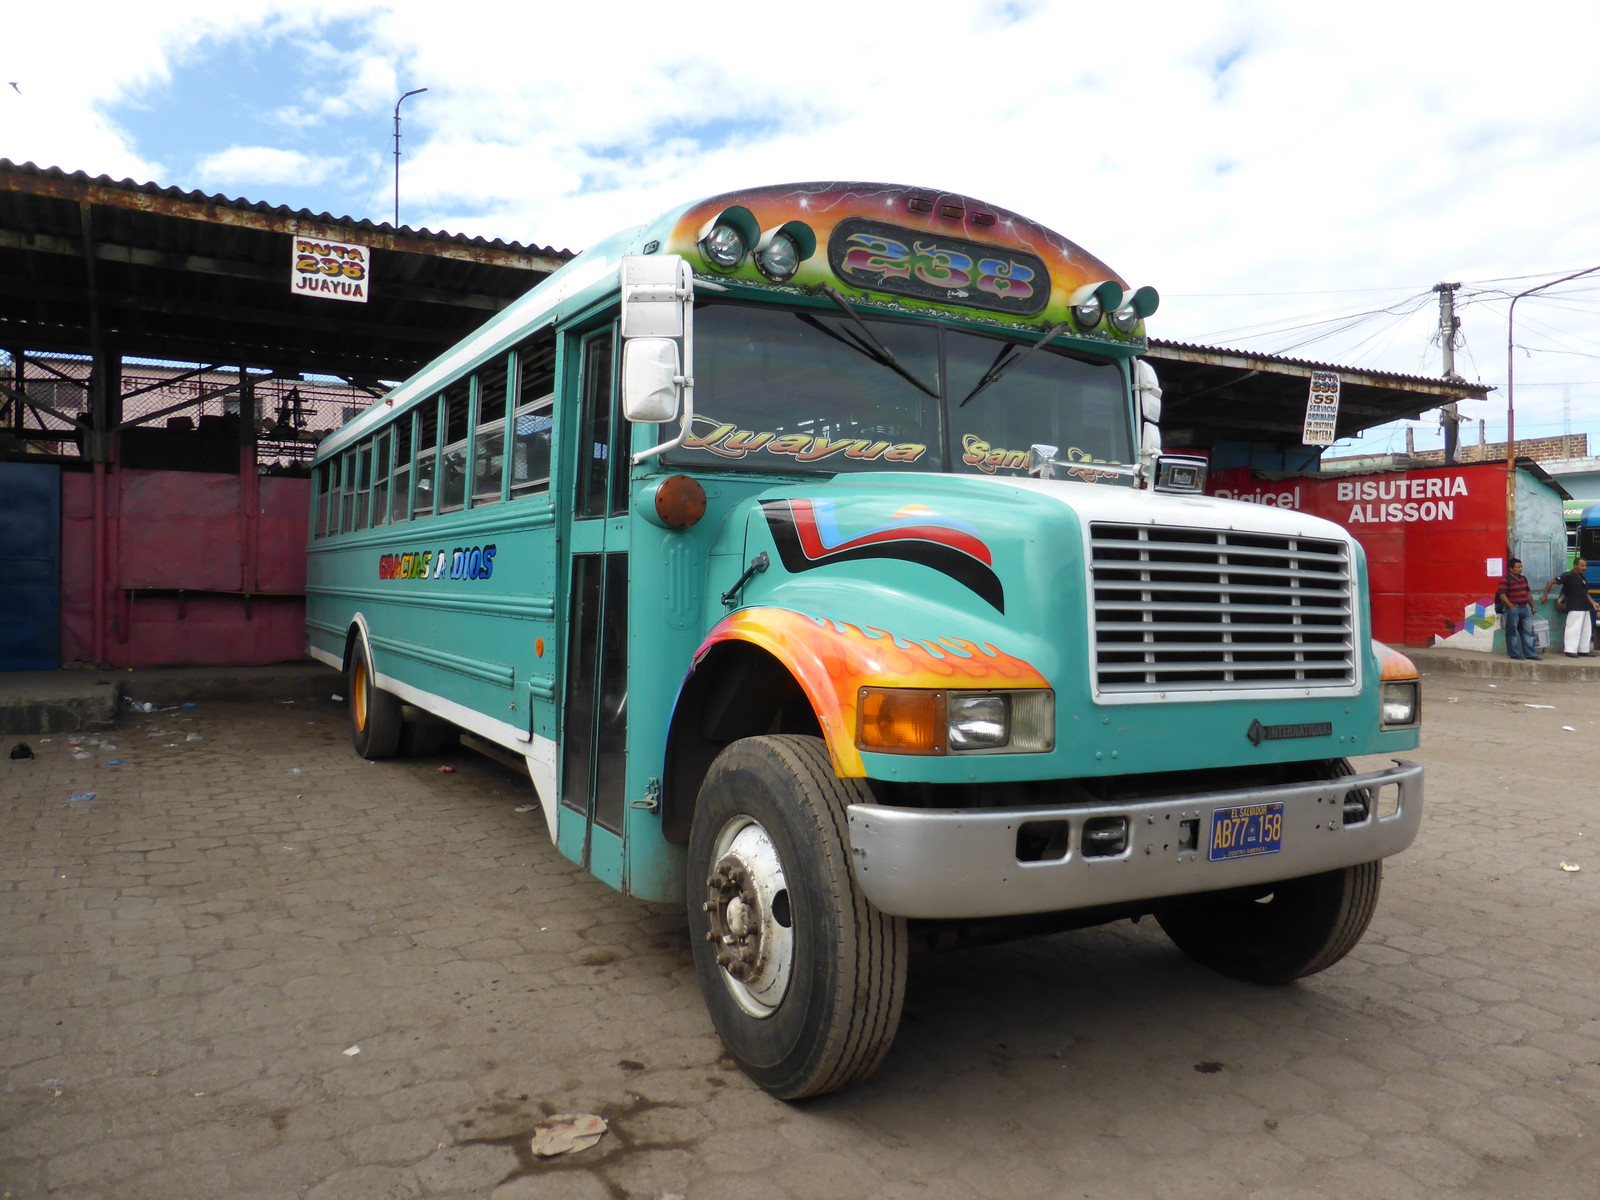 The first of four chicken buses we took on the Ruta de las Flores